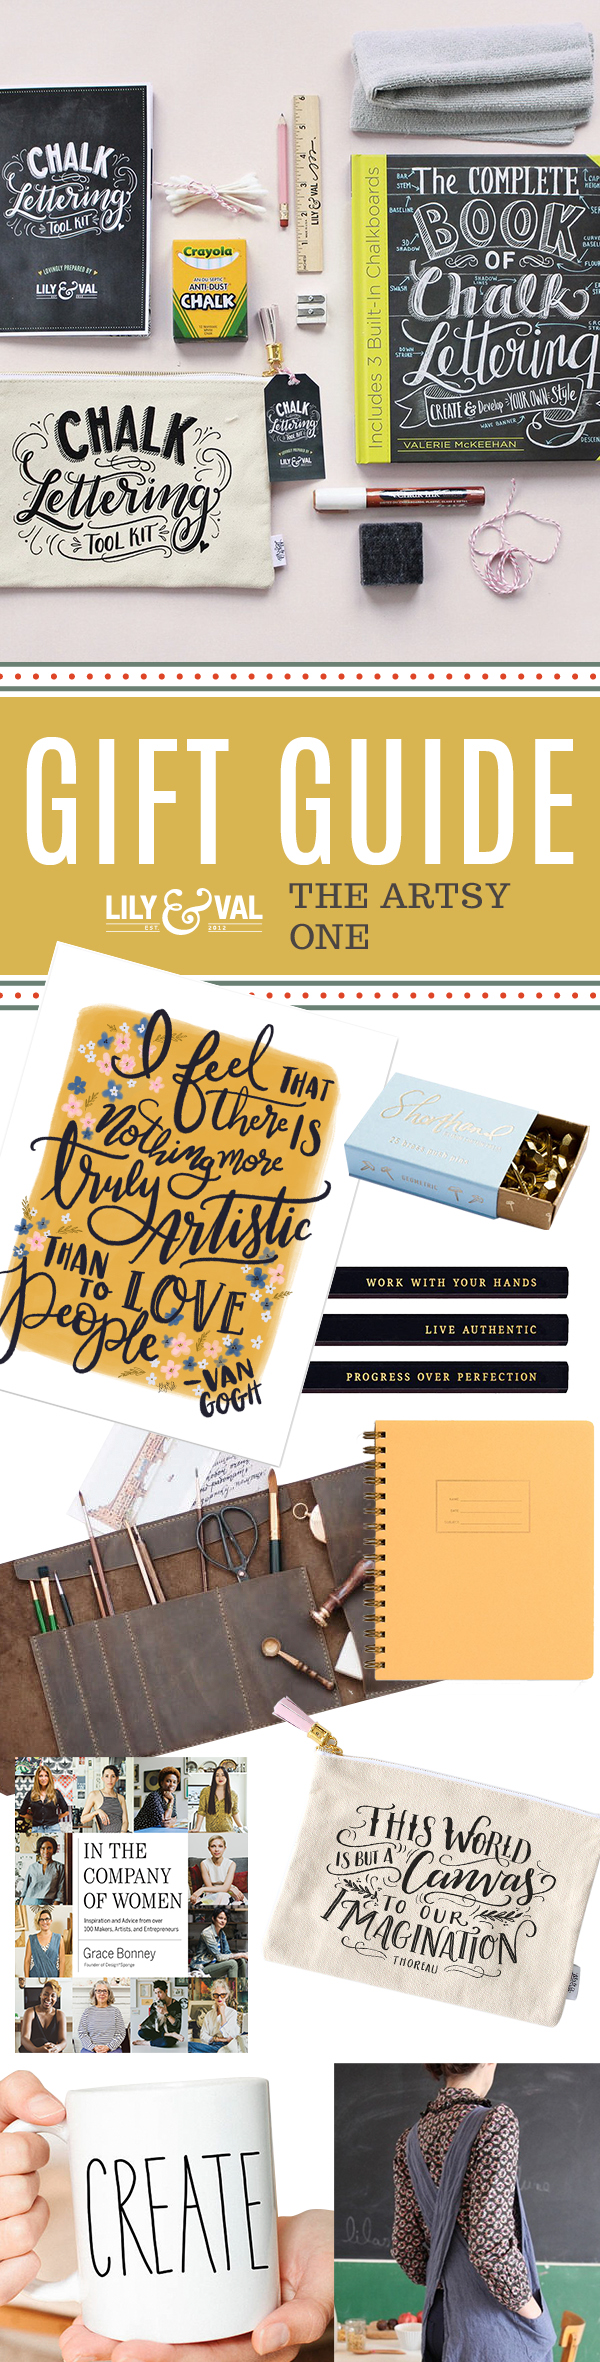 Lily & Val Gift Guide: The Artsy One